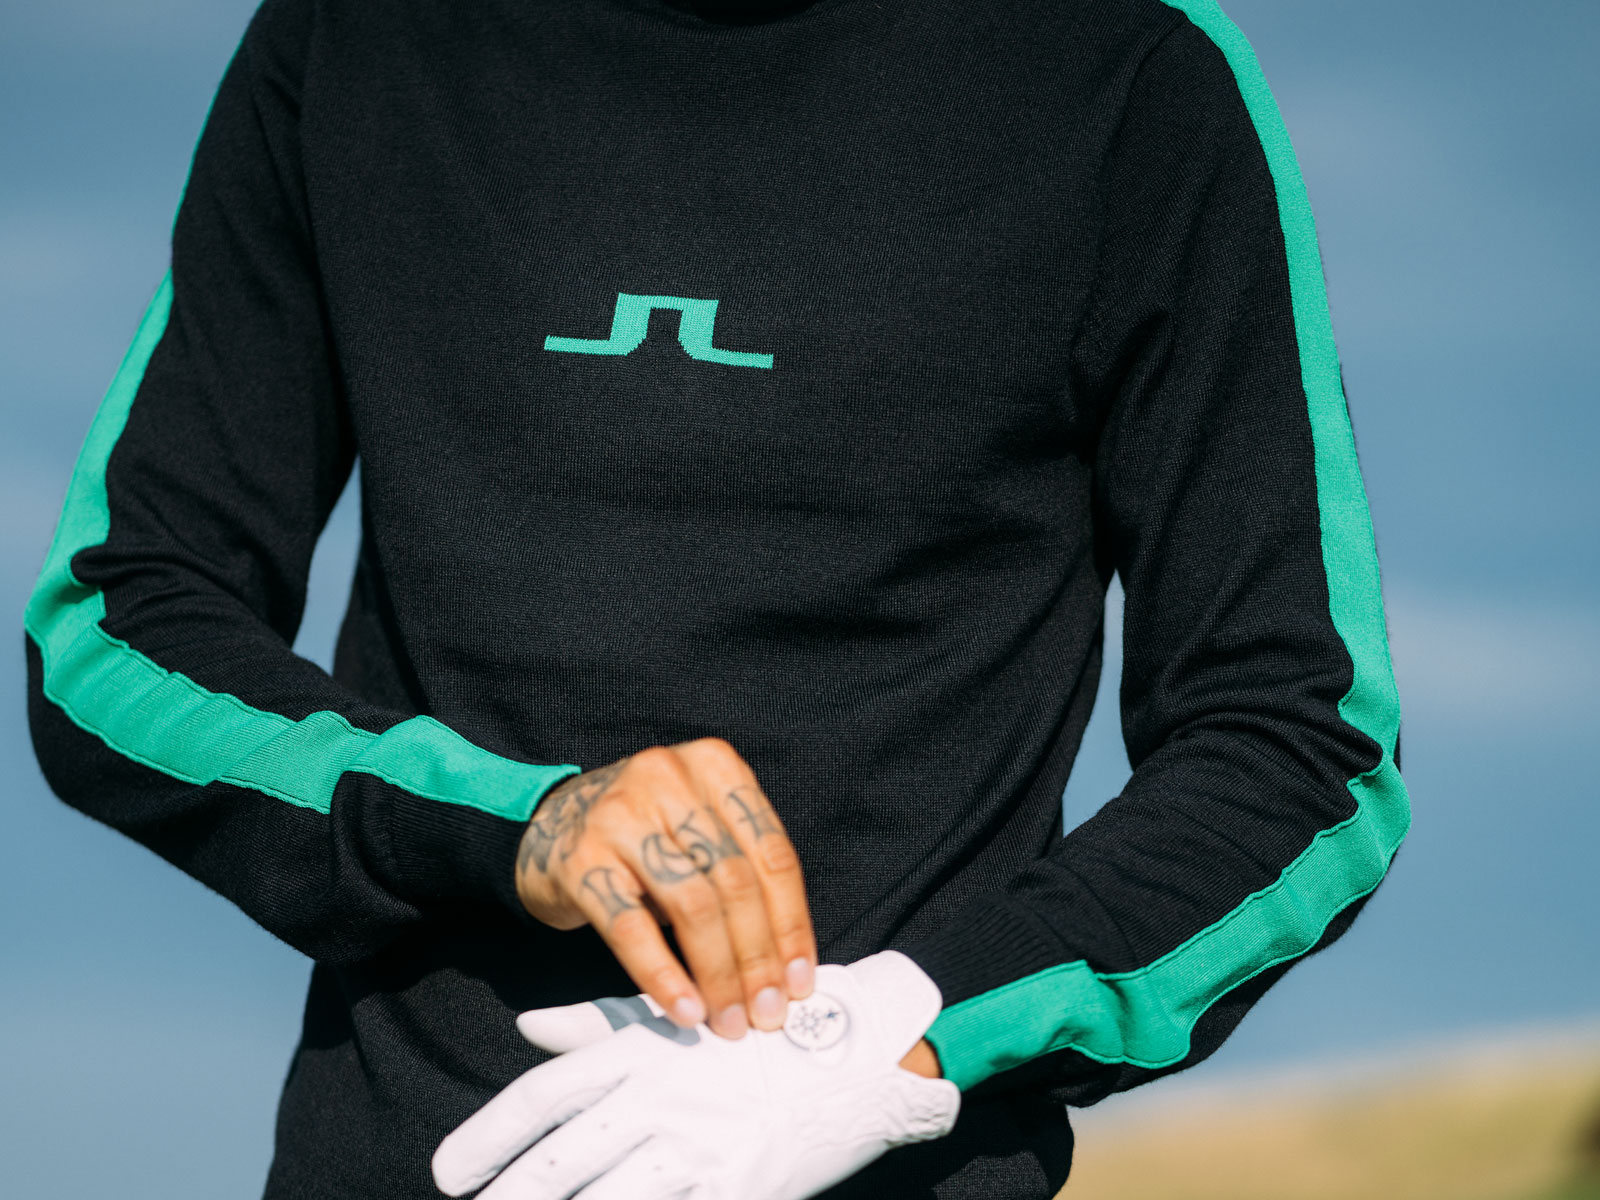 J Lindeberg Fall Winter 2020 Golf Collection 16